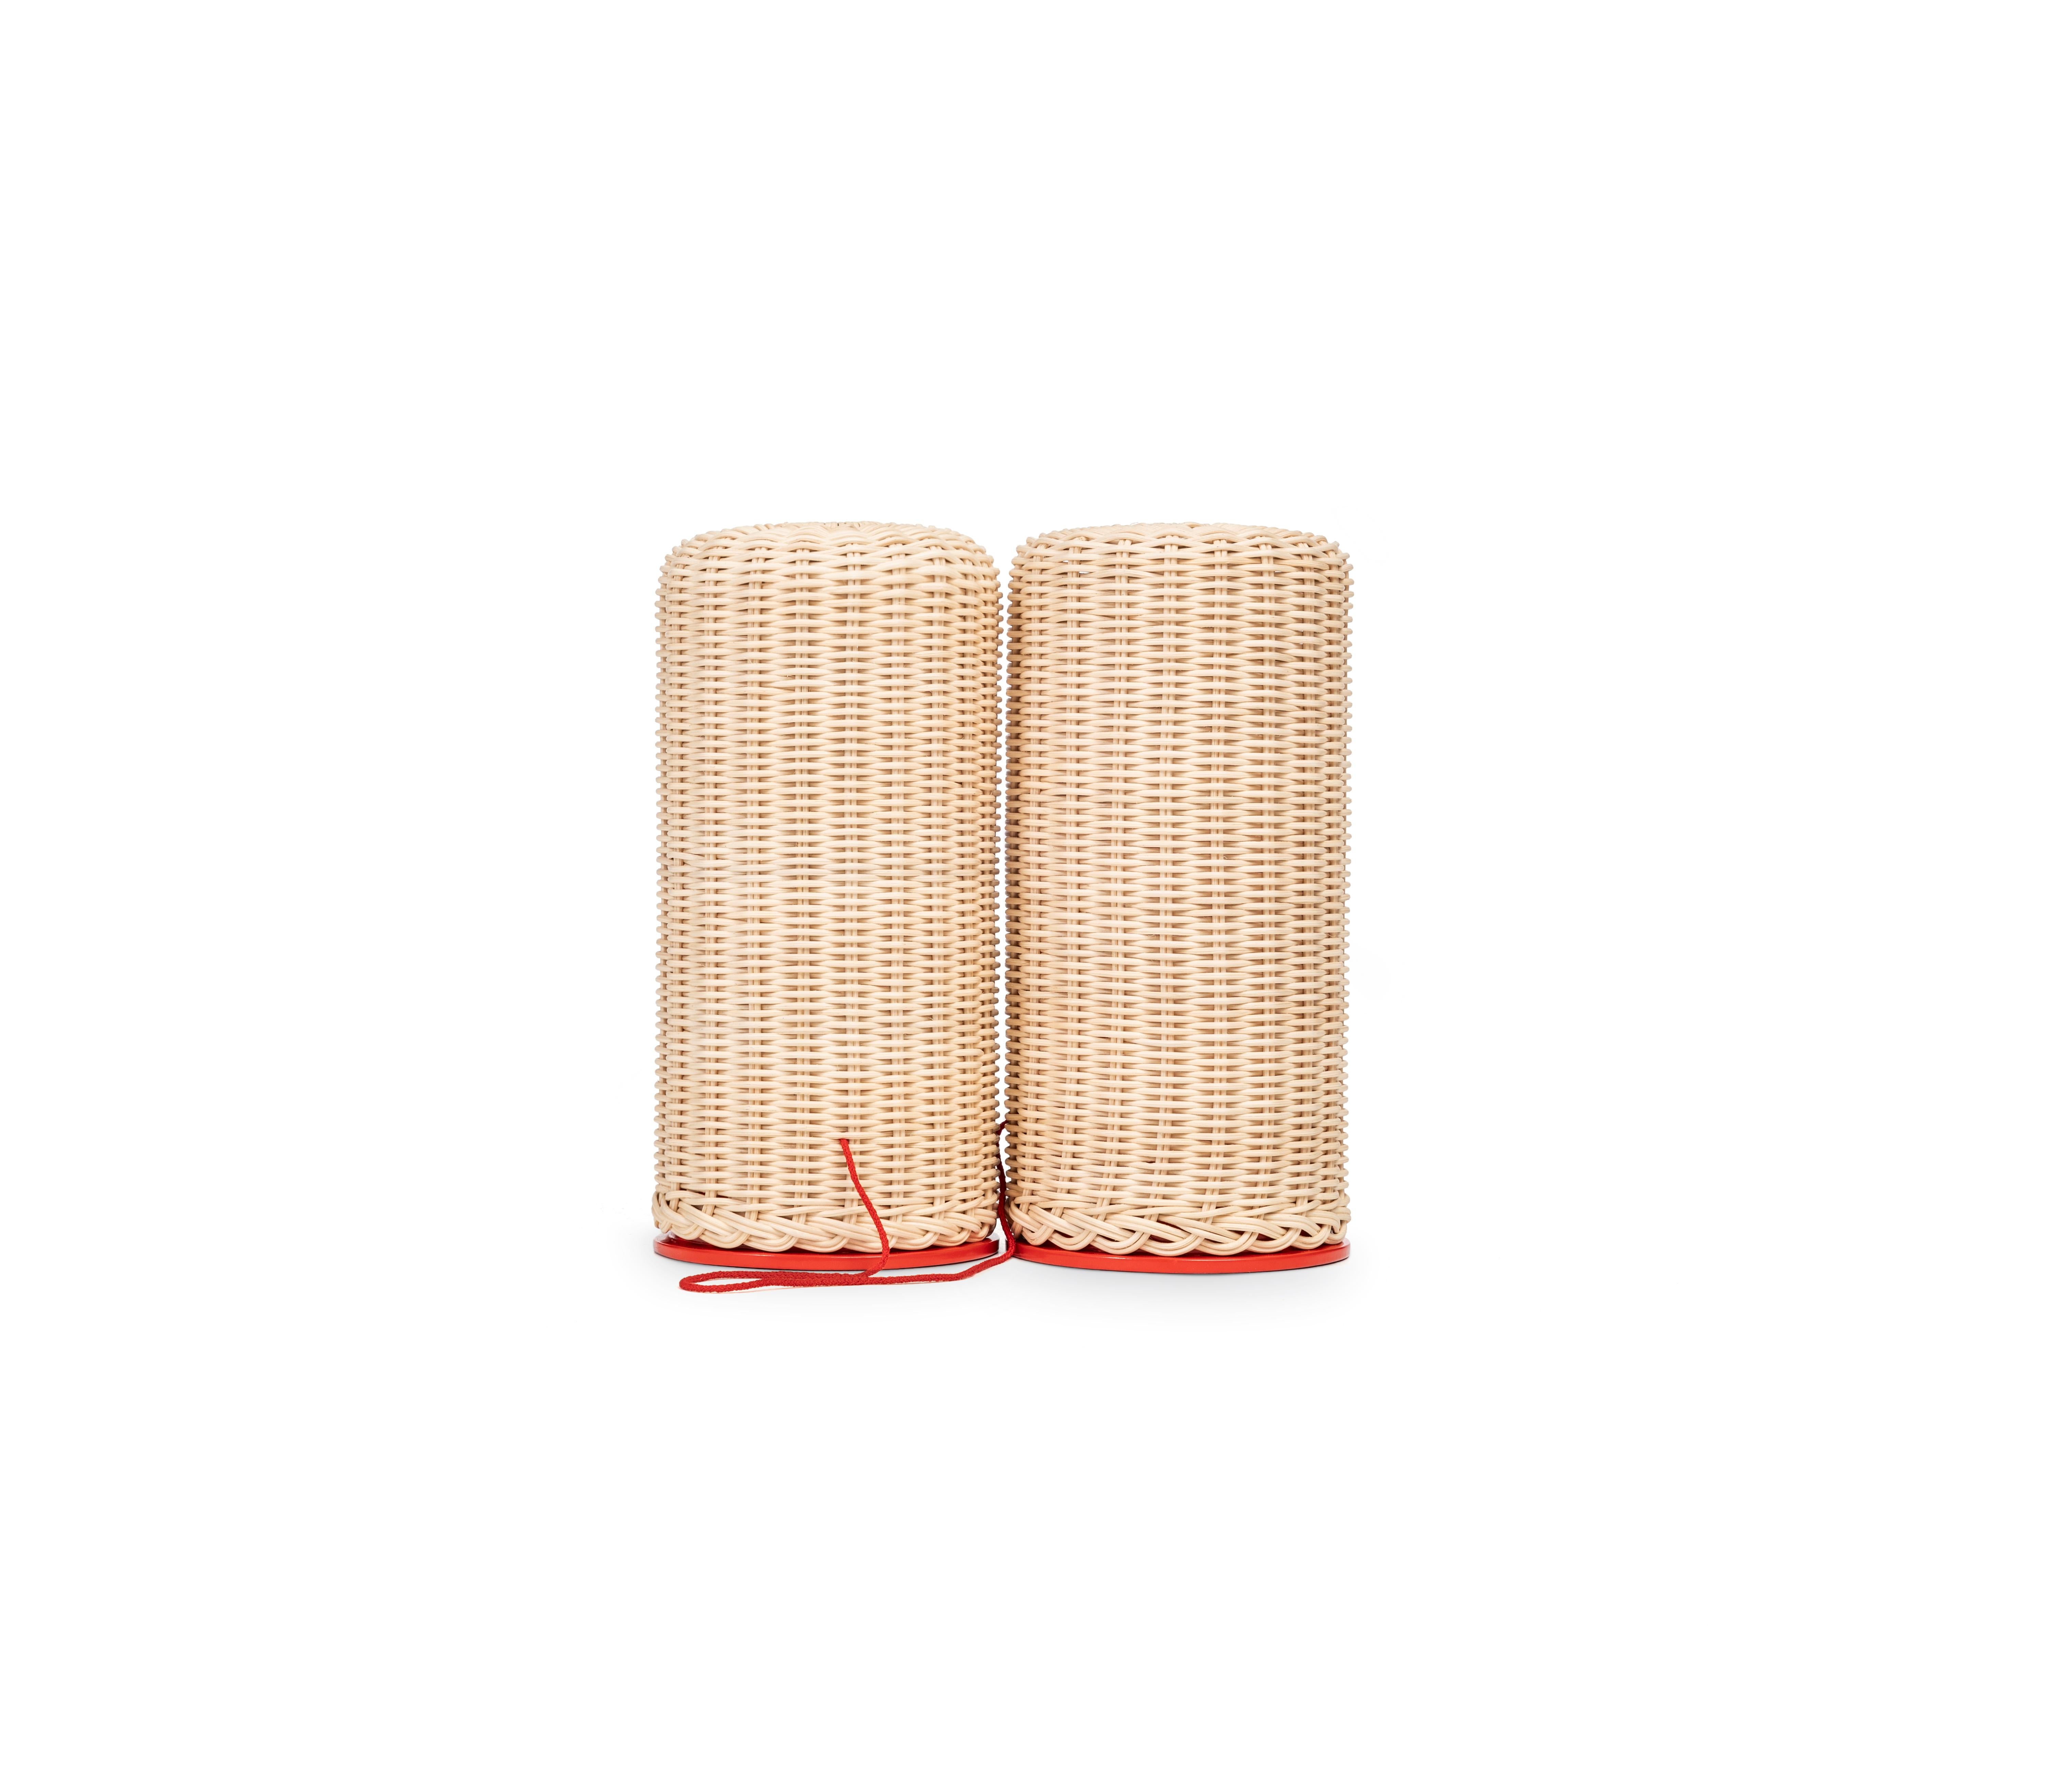 Simbiosi is a pair of hand-woven rattan elements, joined by a red silk thread.
The project celebrates the intimate relationship between craftsman and object and initiates a dialogue between material and gesture.
The silk thread that connects the two